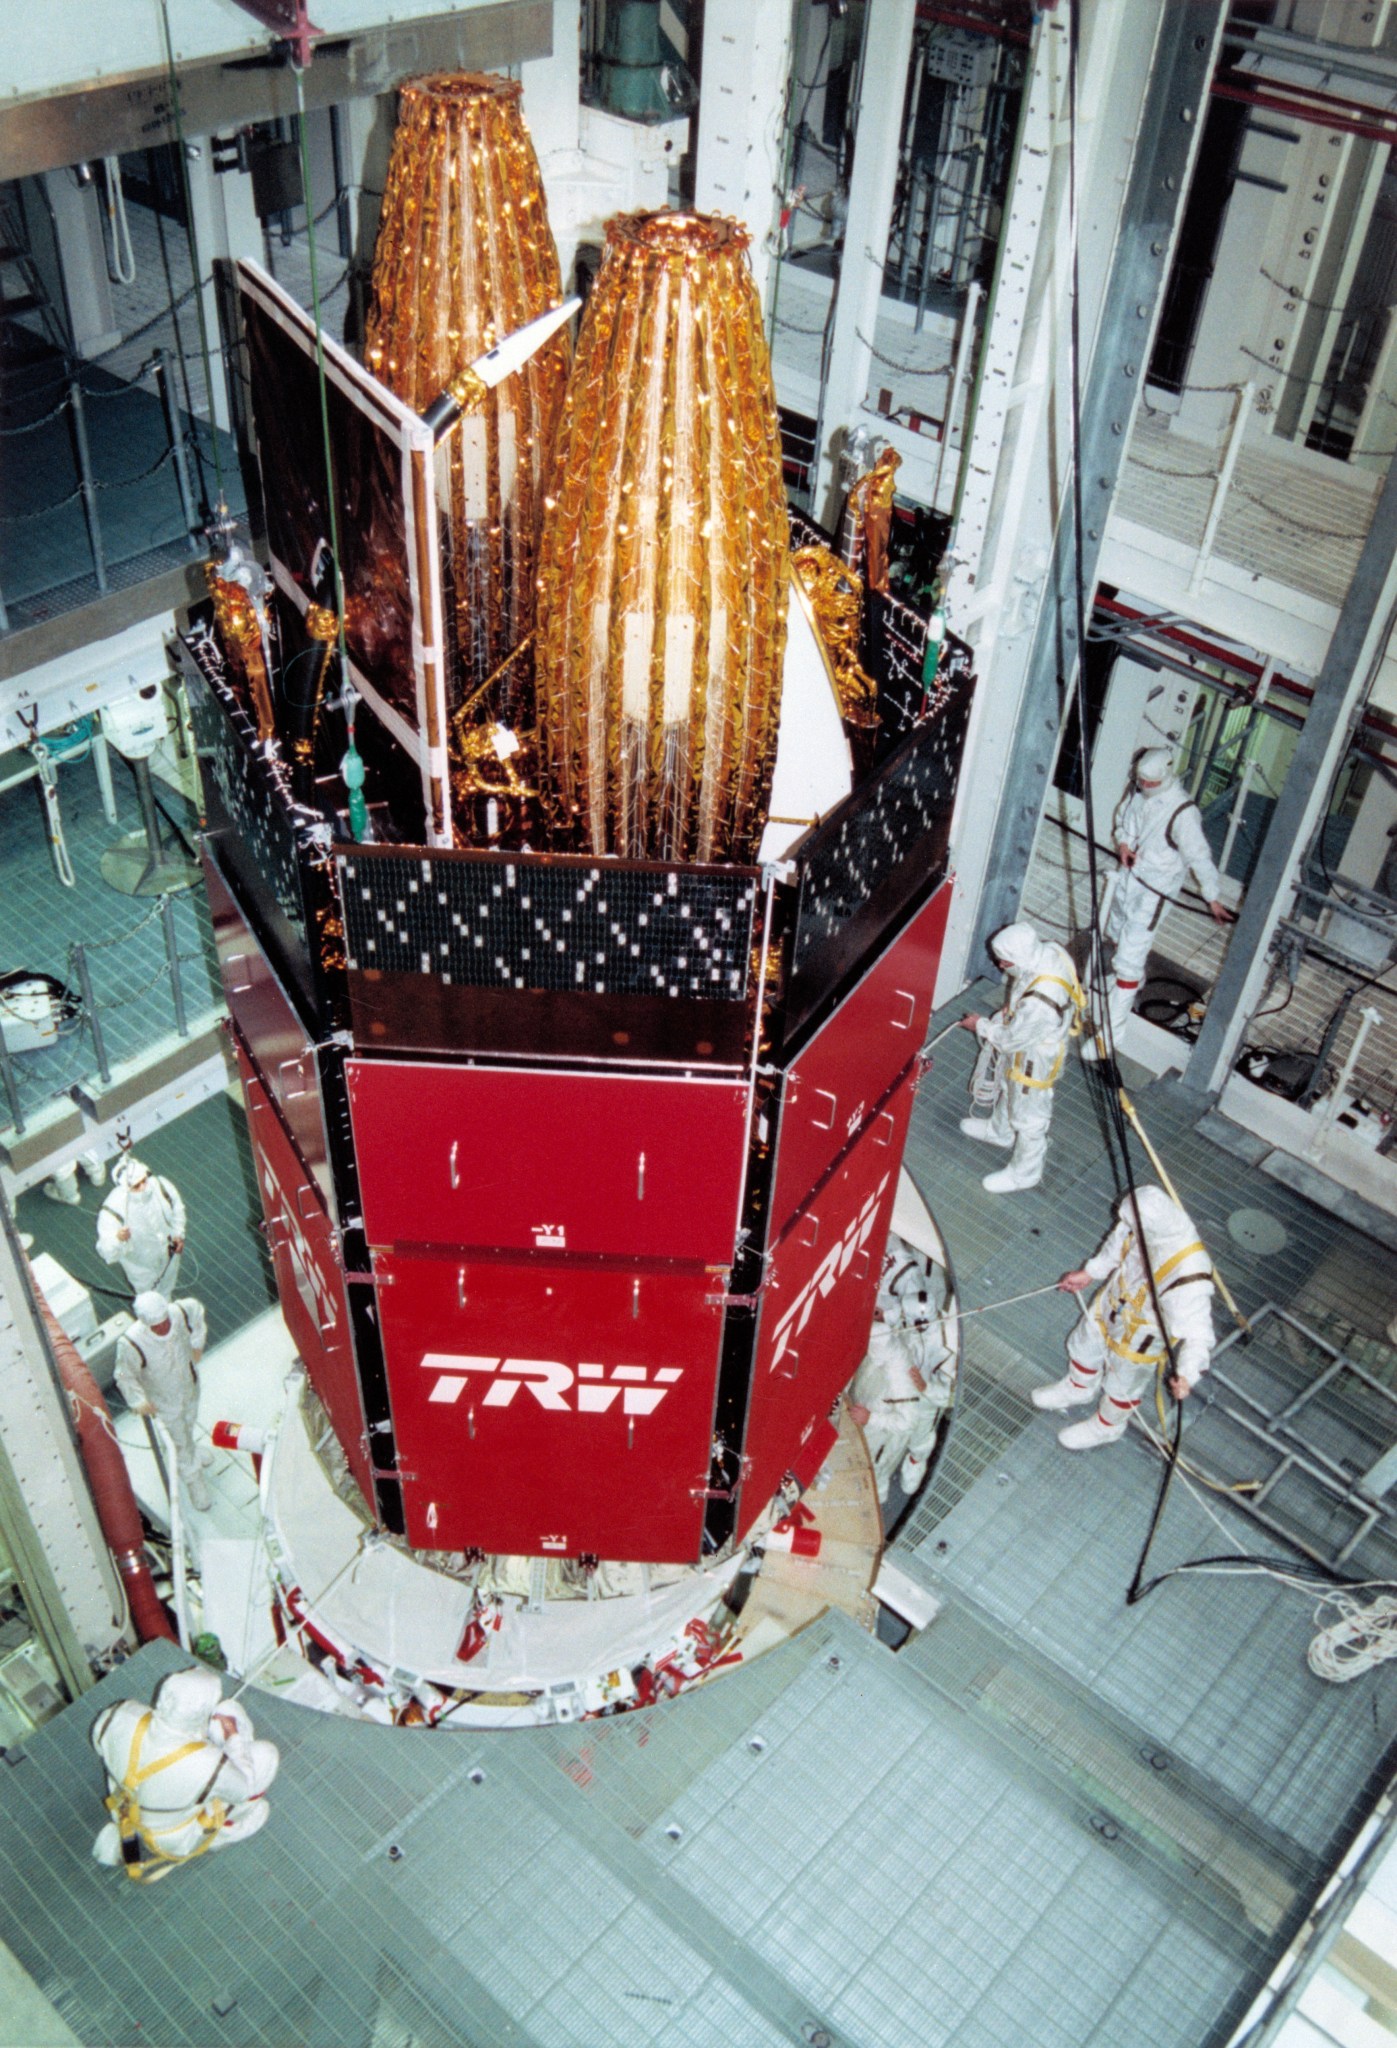 members of the Kennedy’s Payload Processing Team hoist TDRS-G into a work stand in the Vertical Processing Facility.